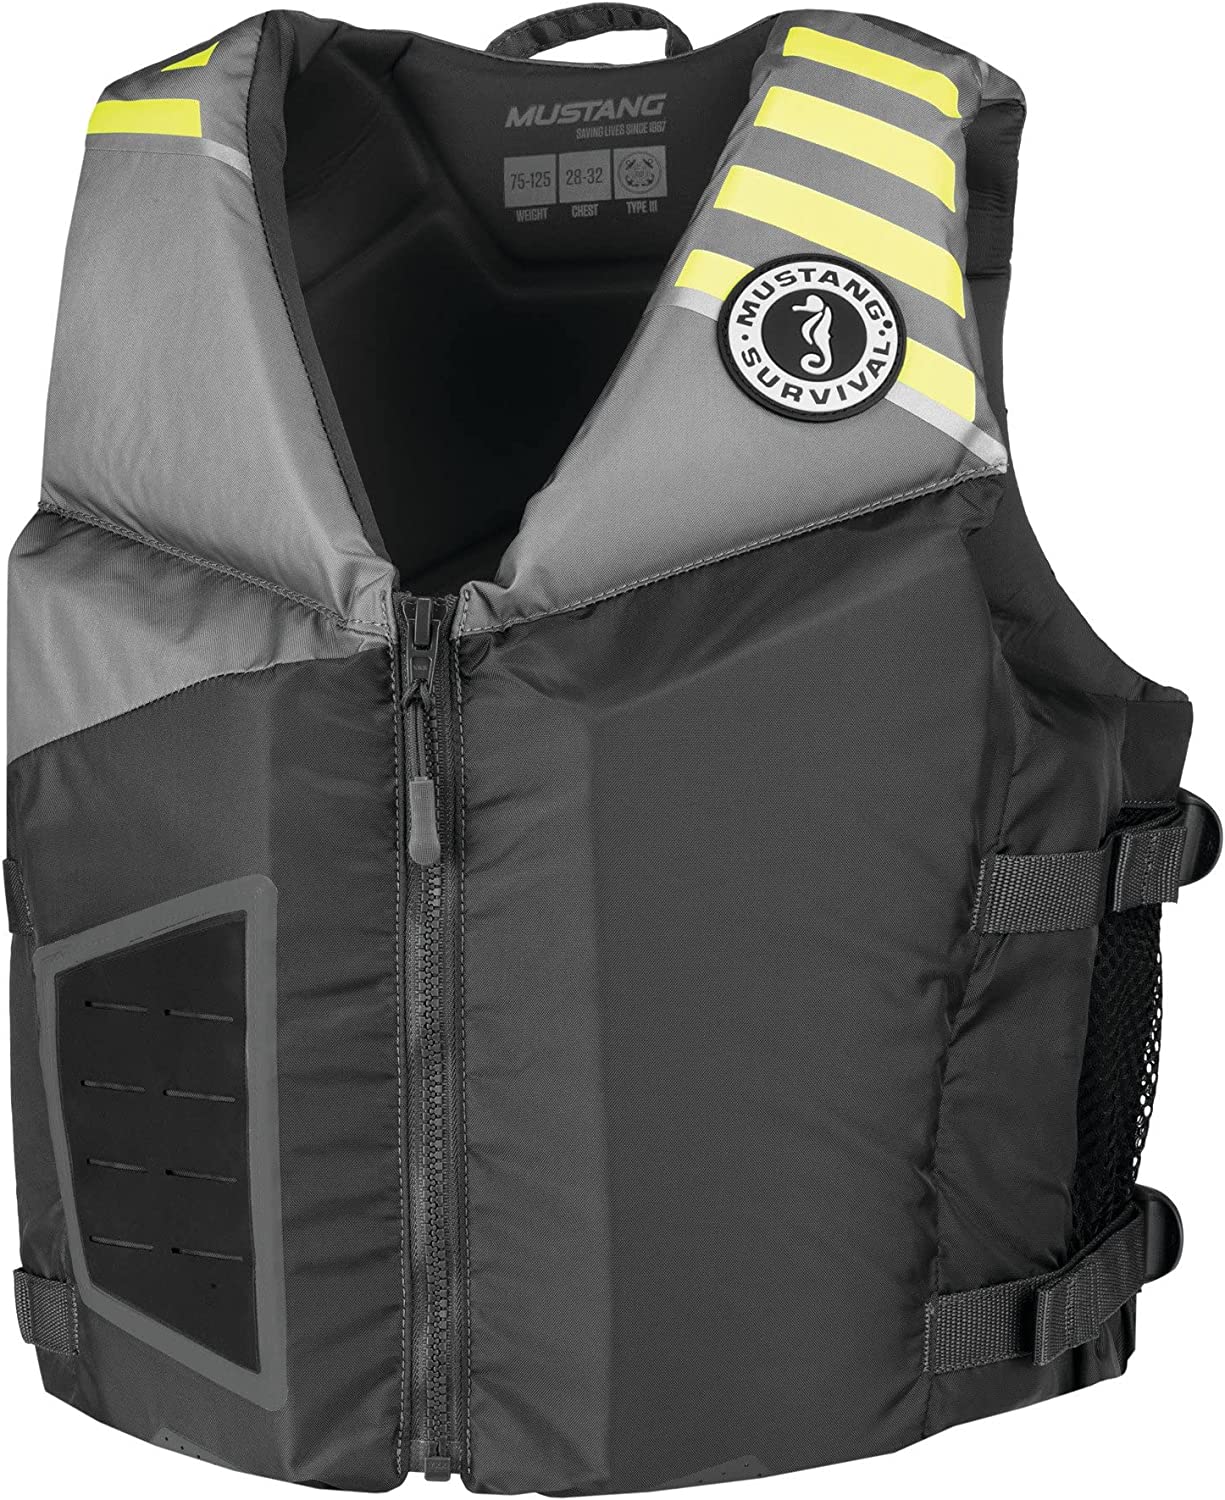 Mustang Survival – Rev Young Adult Foam Vest – Gray- Fluorescent Yellow Green, Young Adult (88 lb. – 110 lb.)